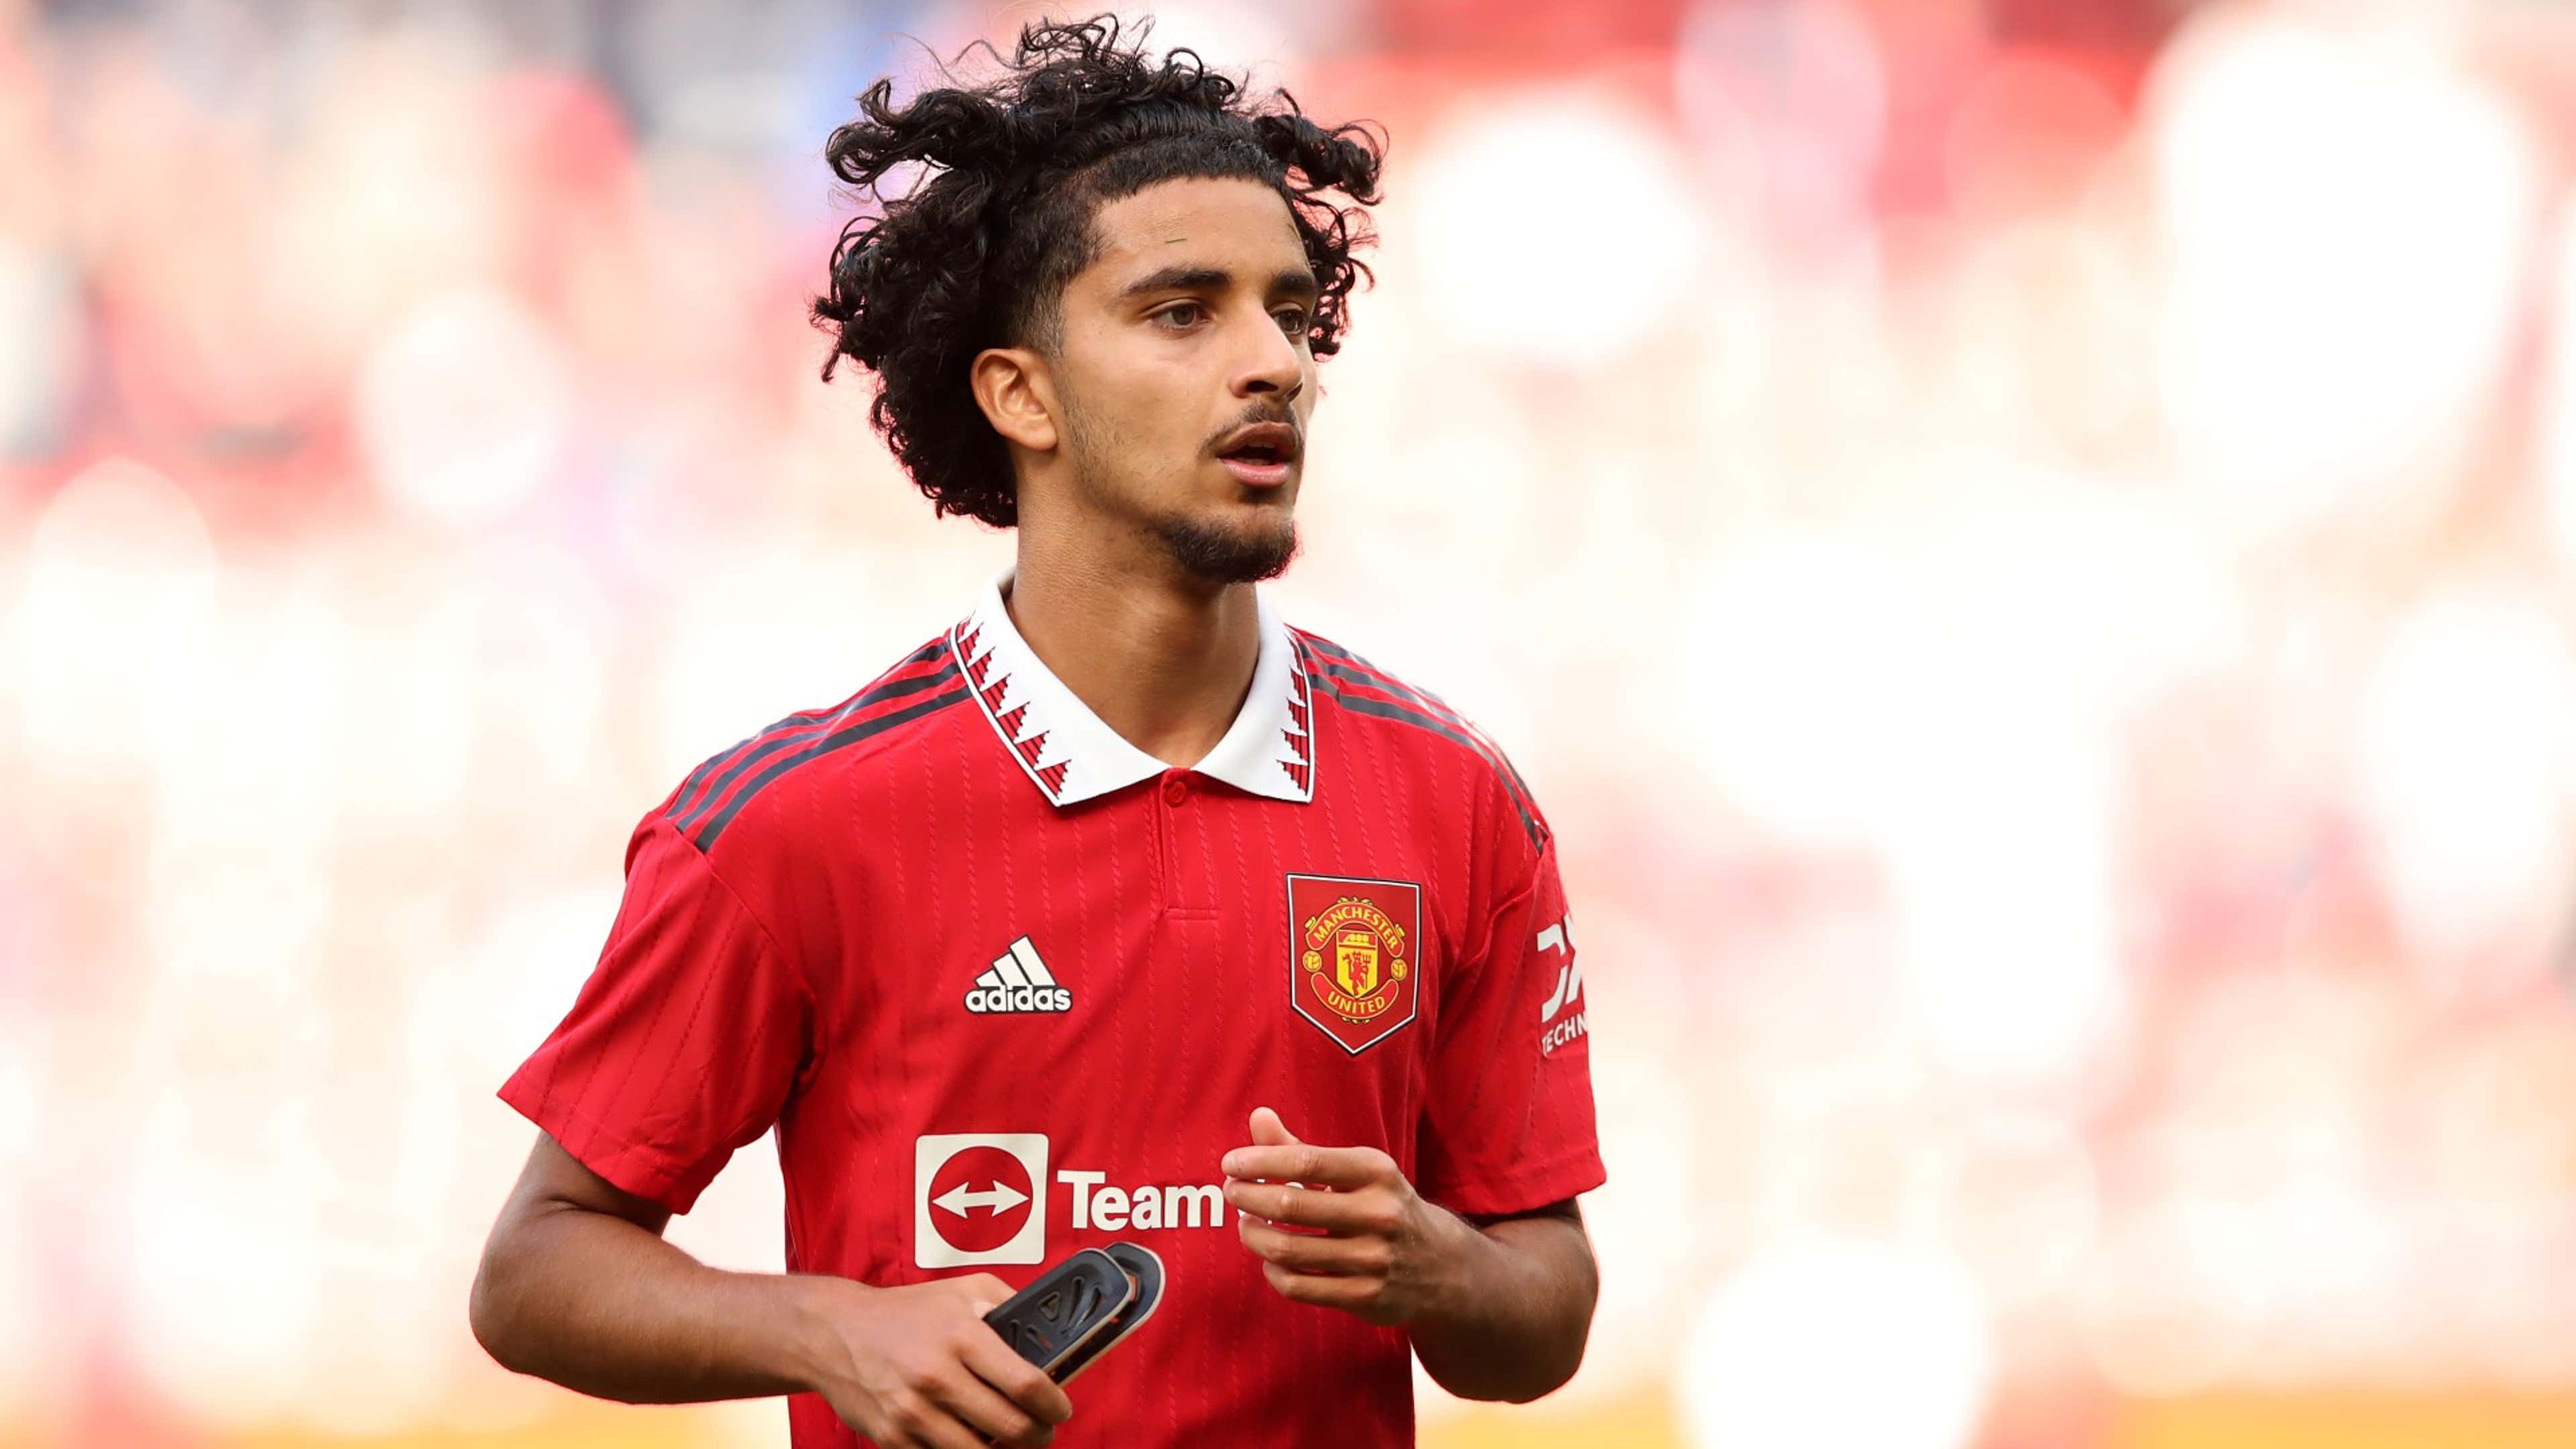 I know he plays for Liverpool but…' - Zidane Iqbal inspired by Man Utd rival & a Red Devils transfer target | Goal.com